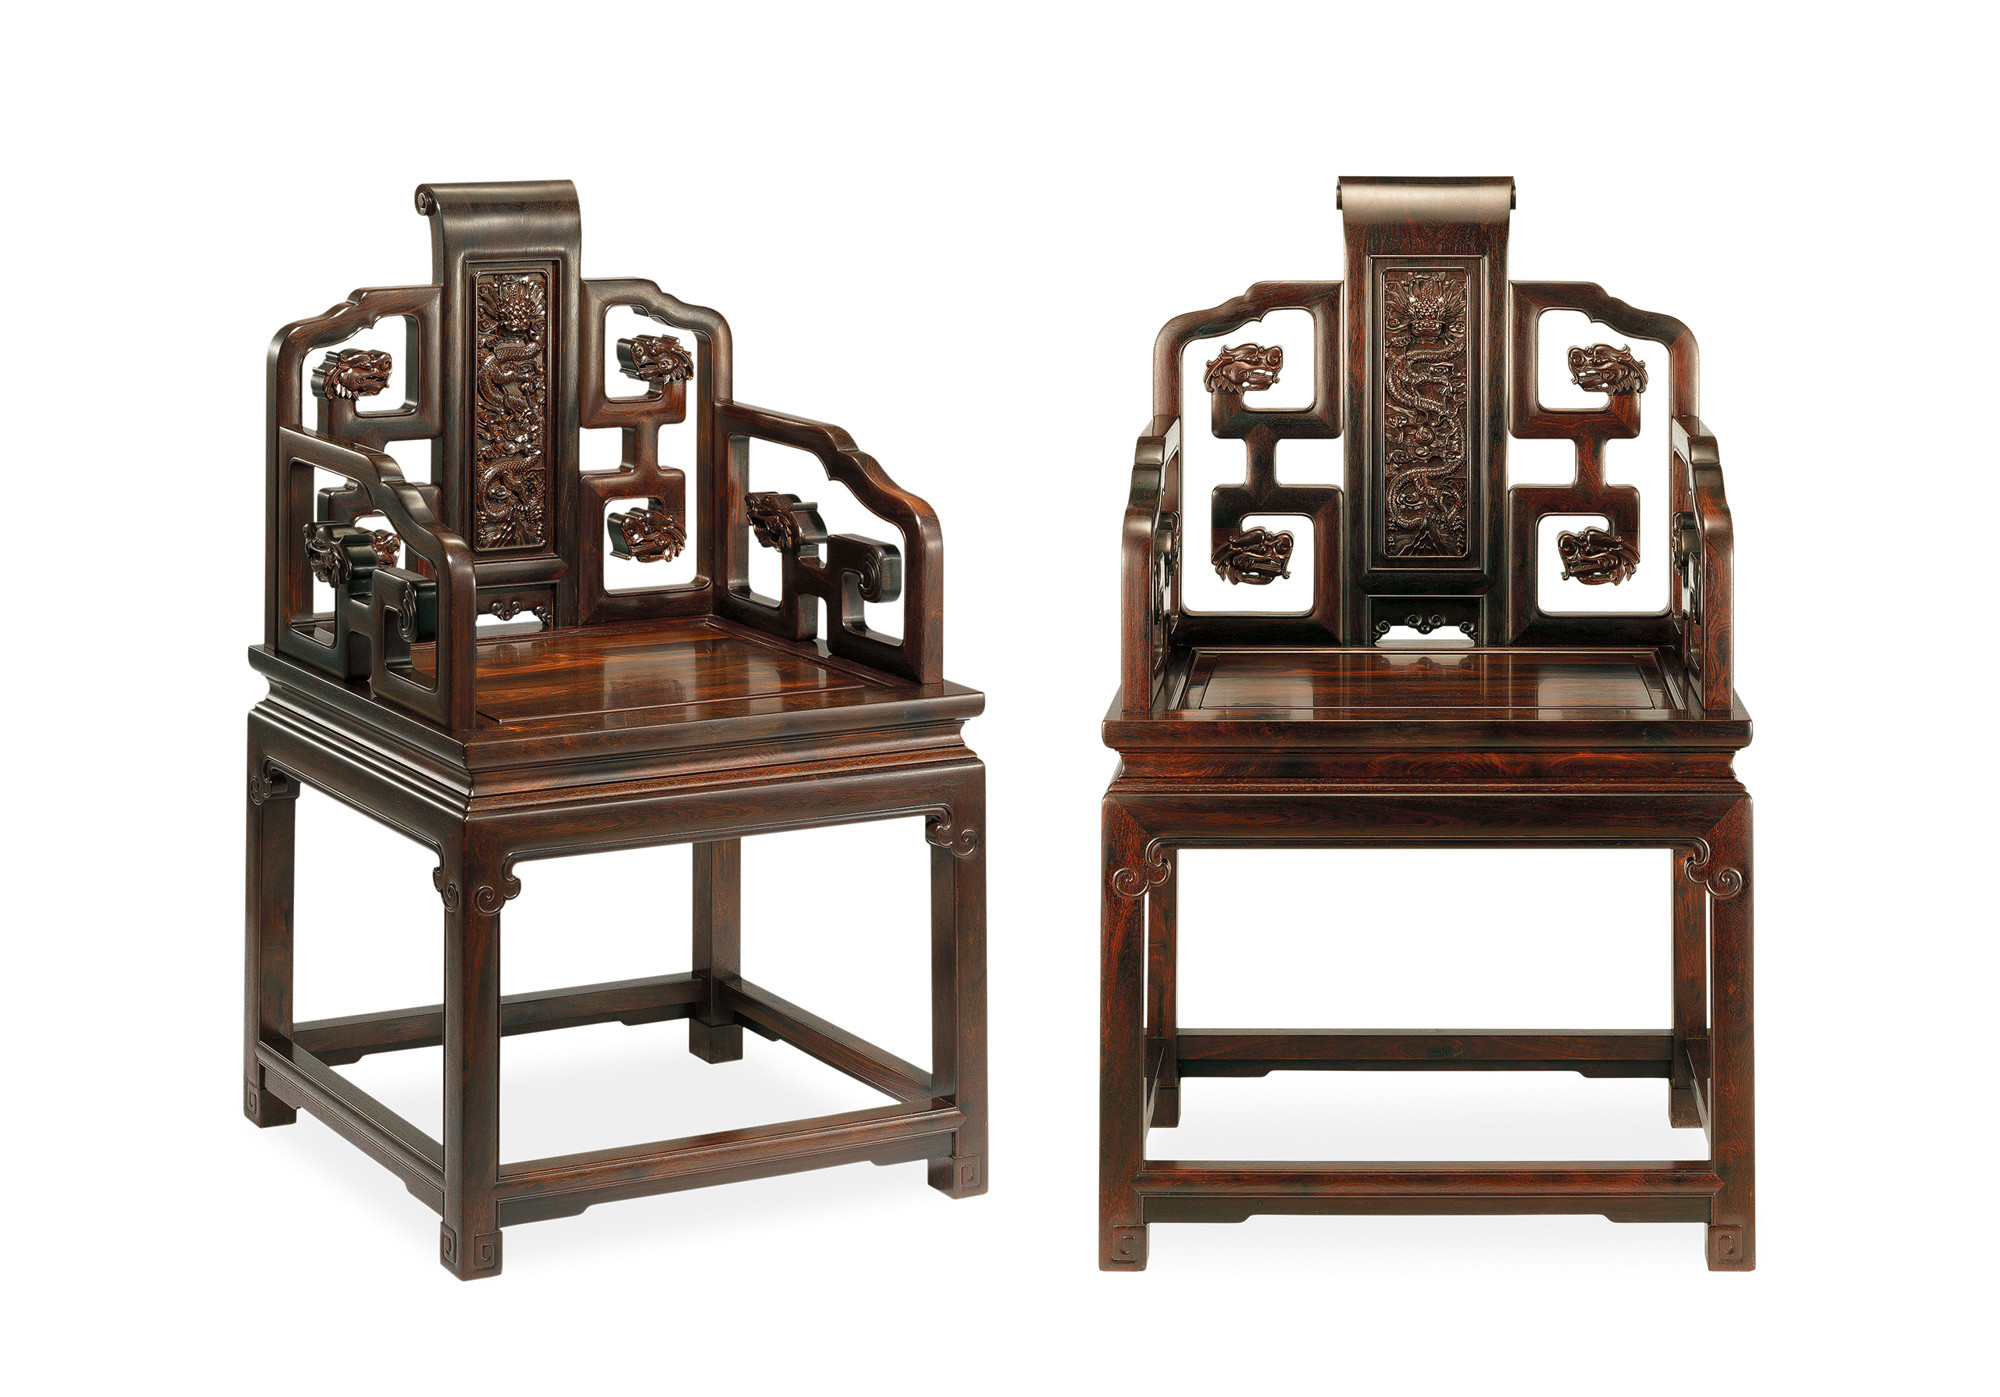 A pair of ZITAN armchairs with dragon patterns